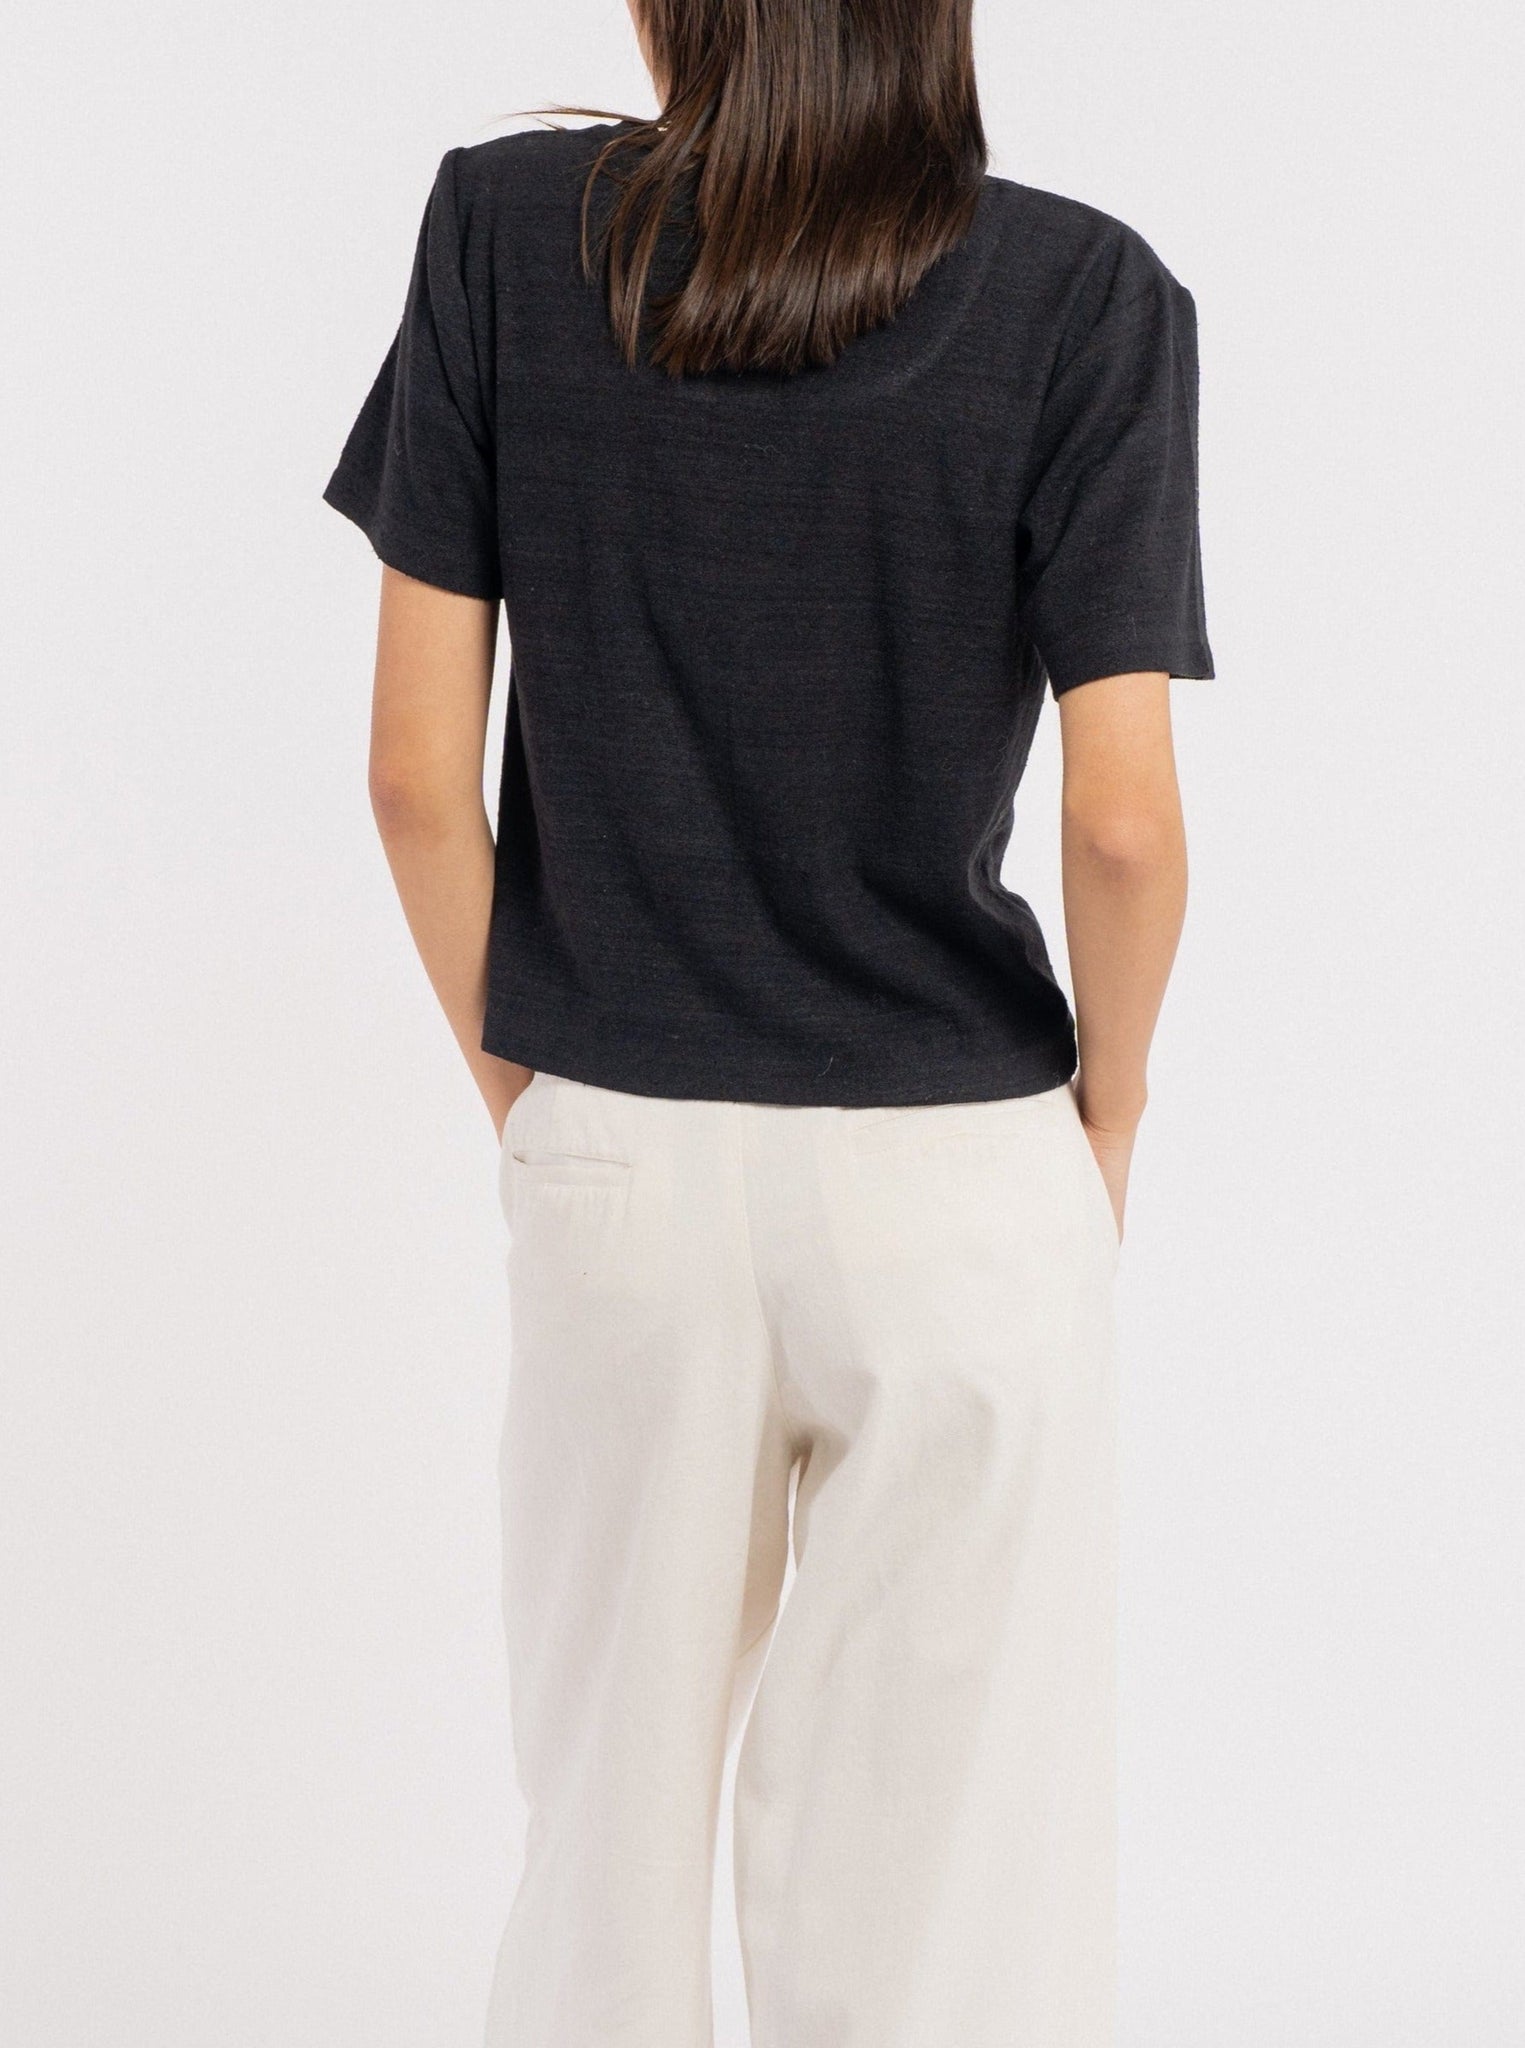 The back view of a woman wearing a Baby Tee - Black - pre-order and wide leg pants.